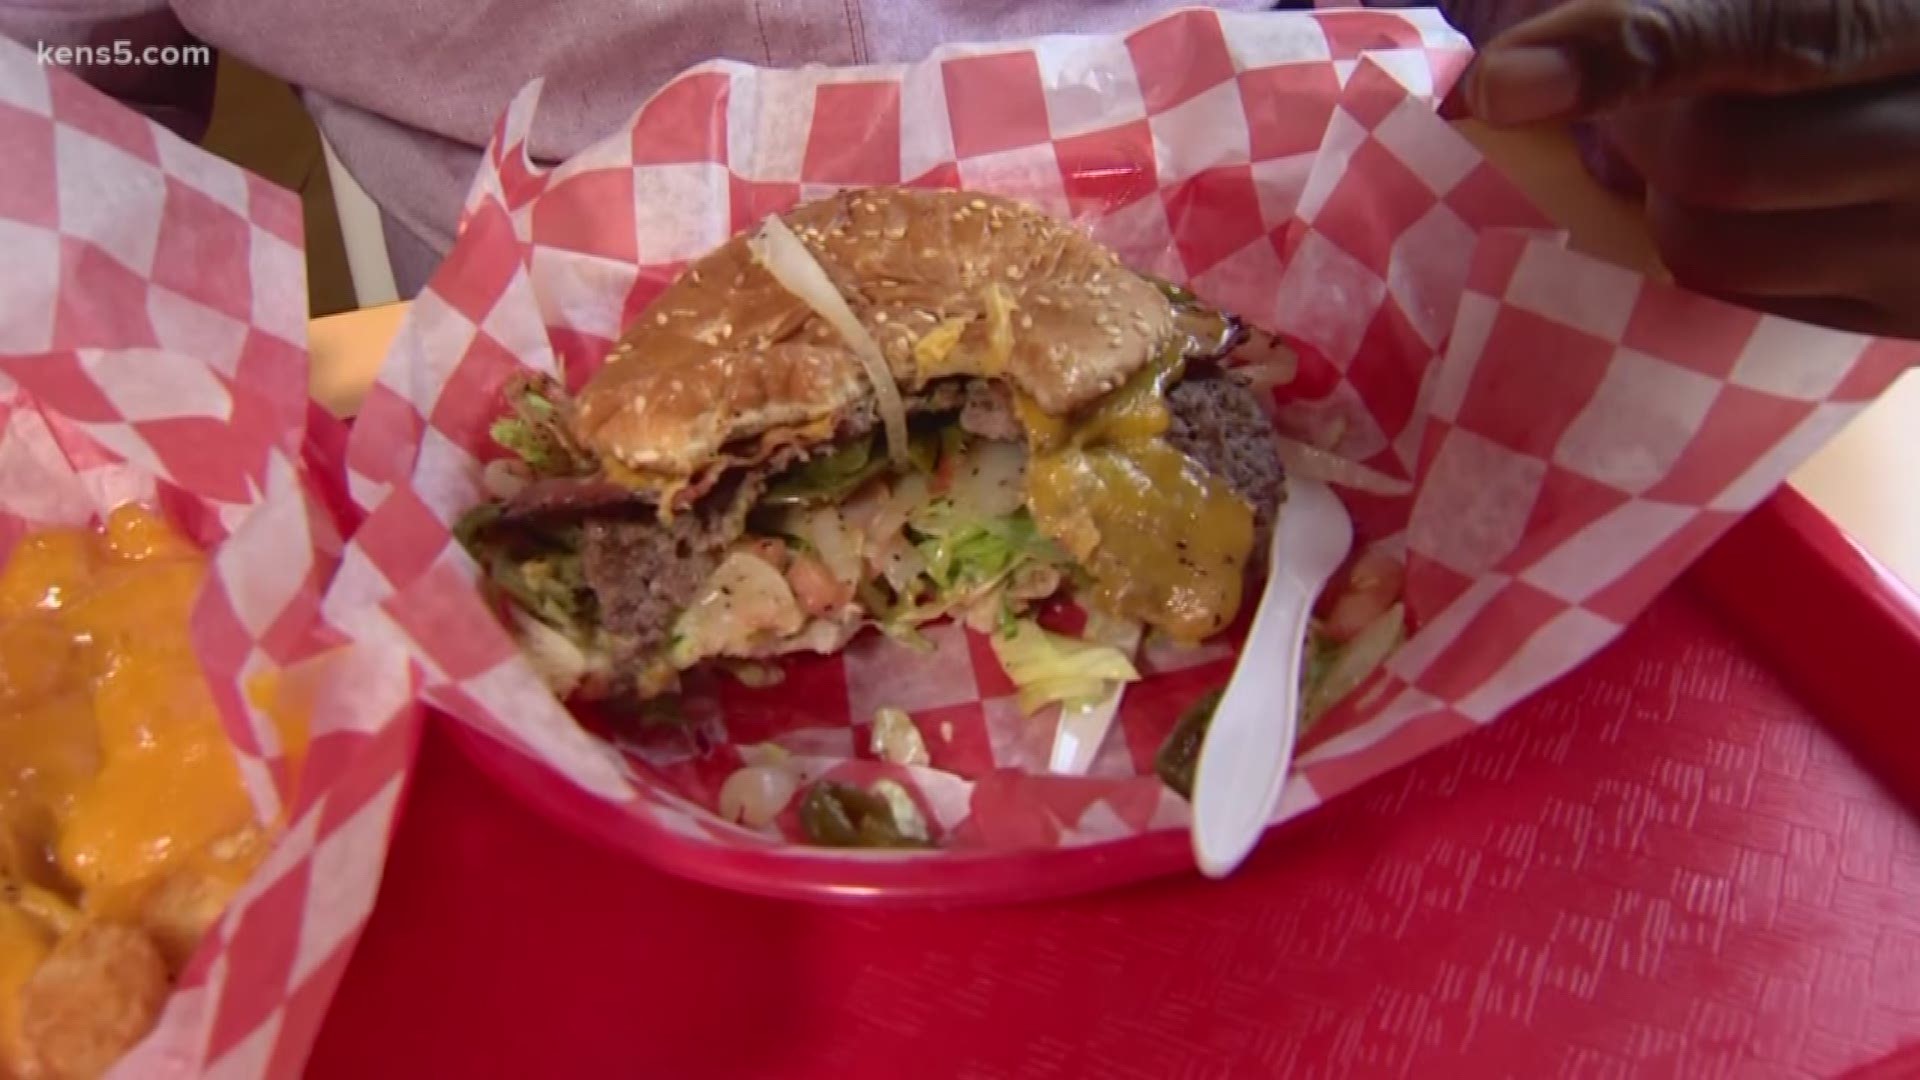 Neighborhood Eats is off the beaten path this morning in search of hamburger hideouts. And KENS 5's Marvin Hurst found hidden gems that might be beefy treasures.